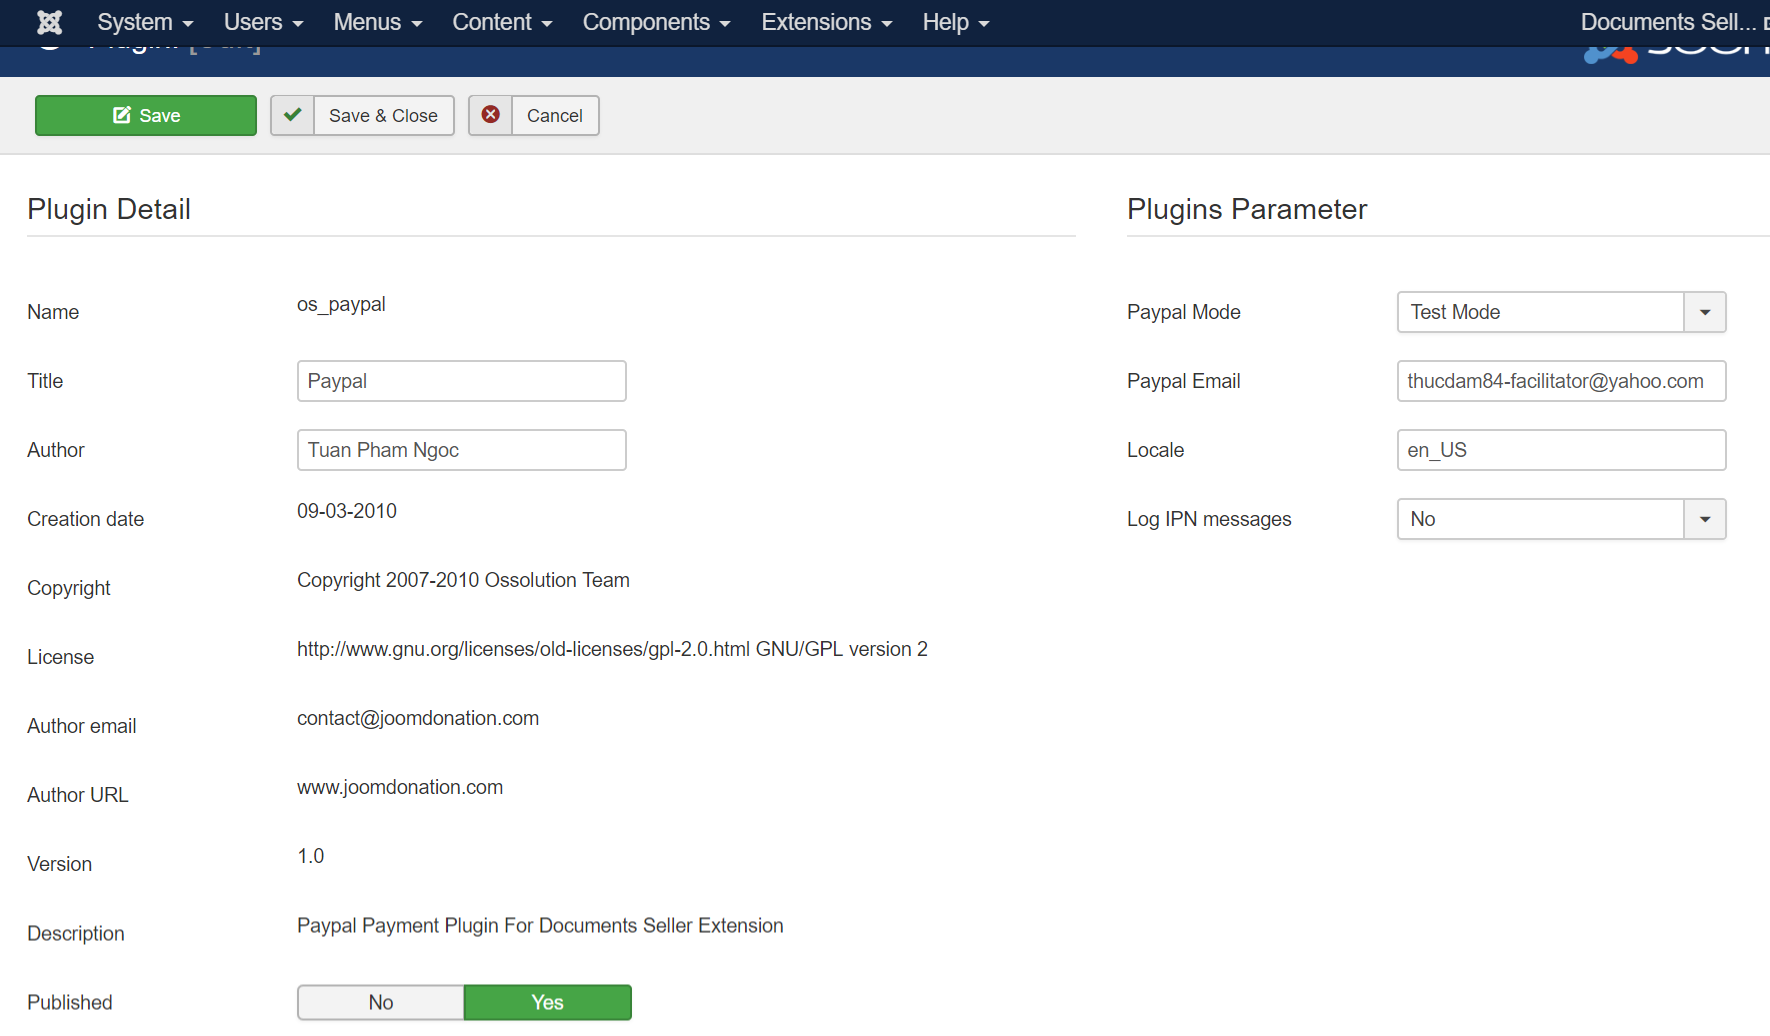 Paypal Payment Plugin Configuration